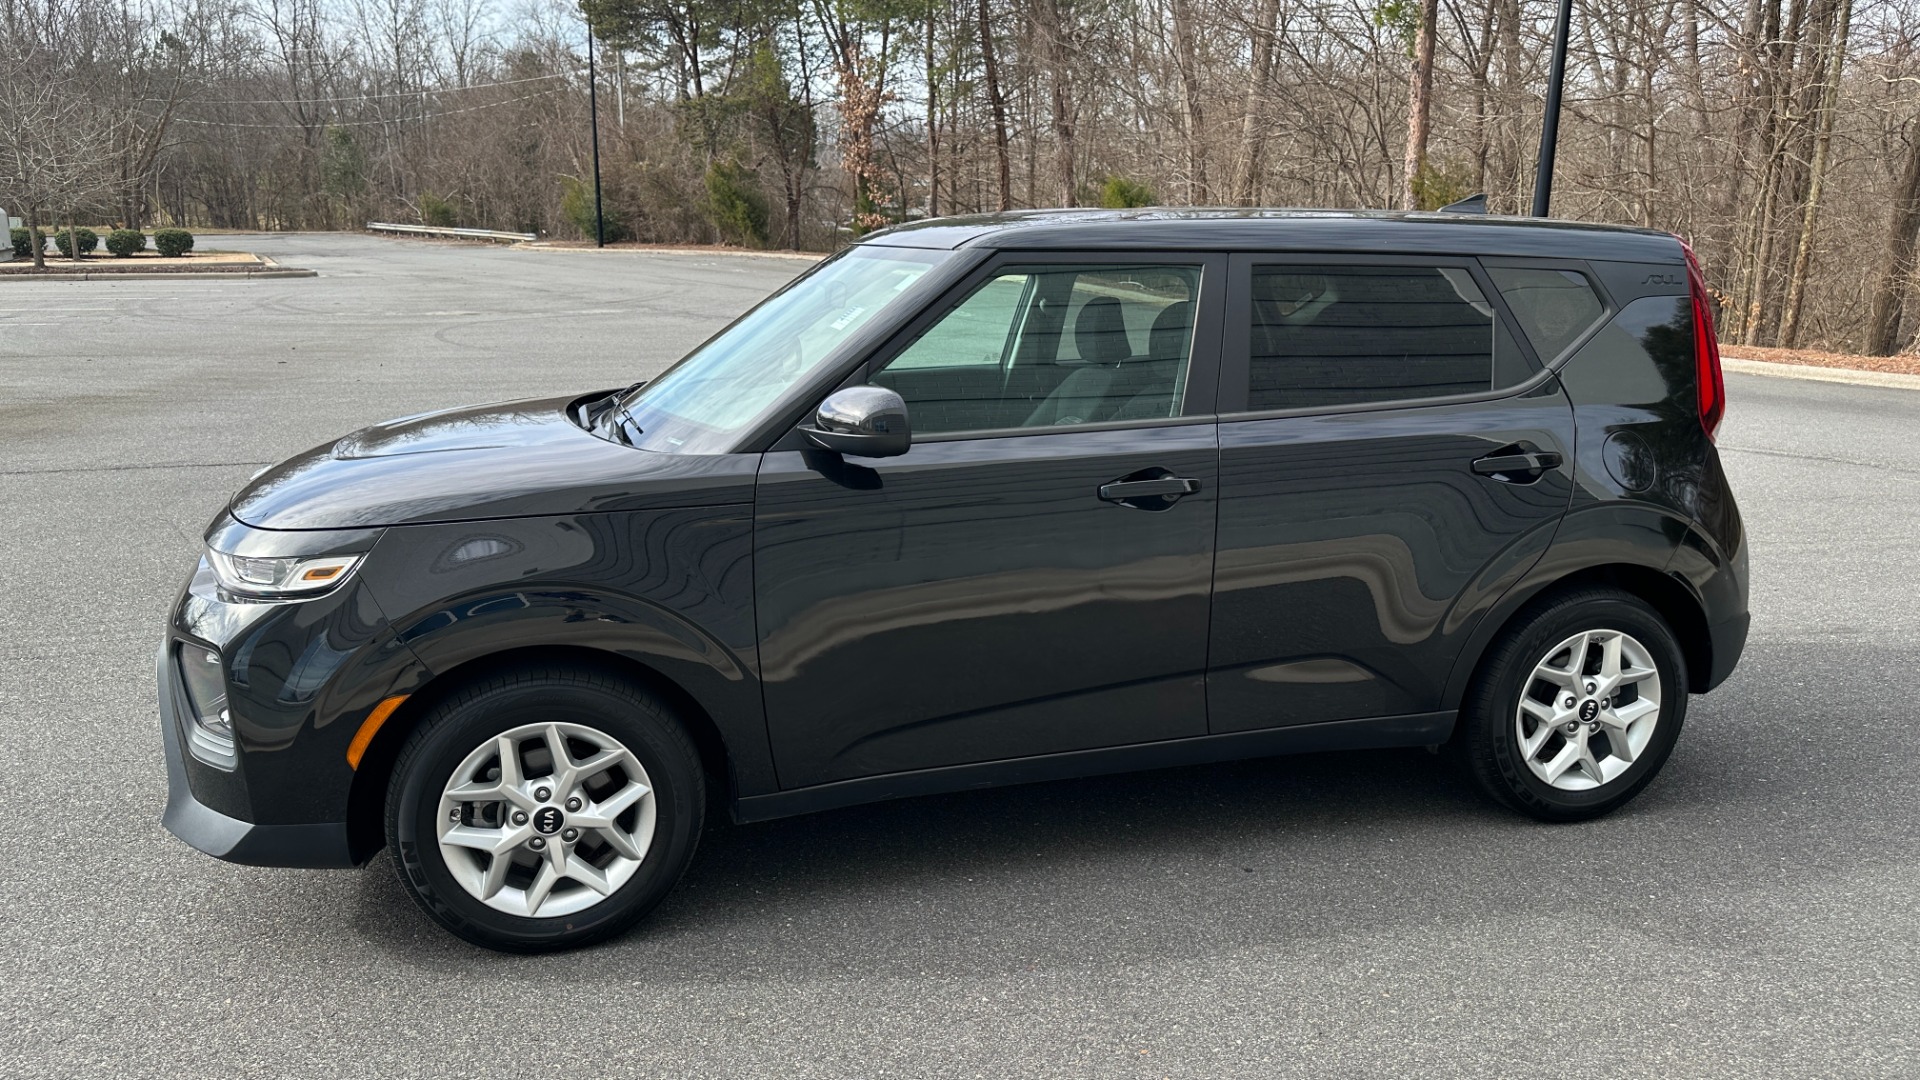 Used 2021 Kia Soul LX / RADIO DISPLAY / 4CYL ENGINE / CARPET FLOOR MATS for sale $17,995 at Formula Imports in Charlotte NC 28227 3